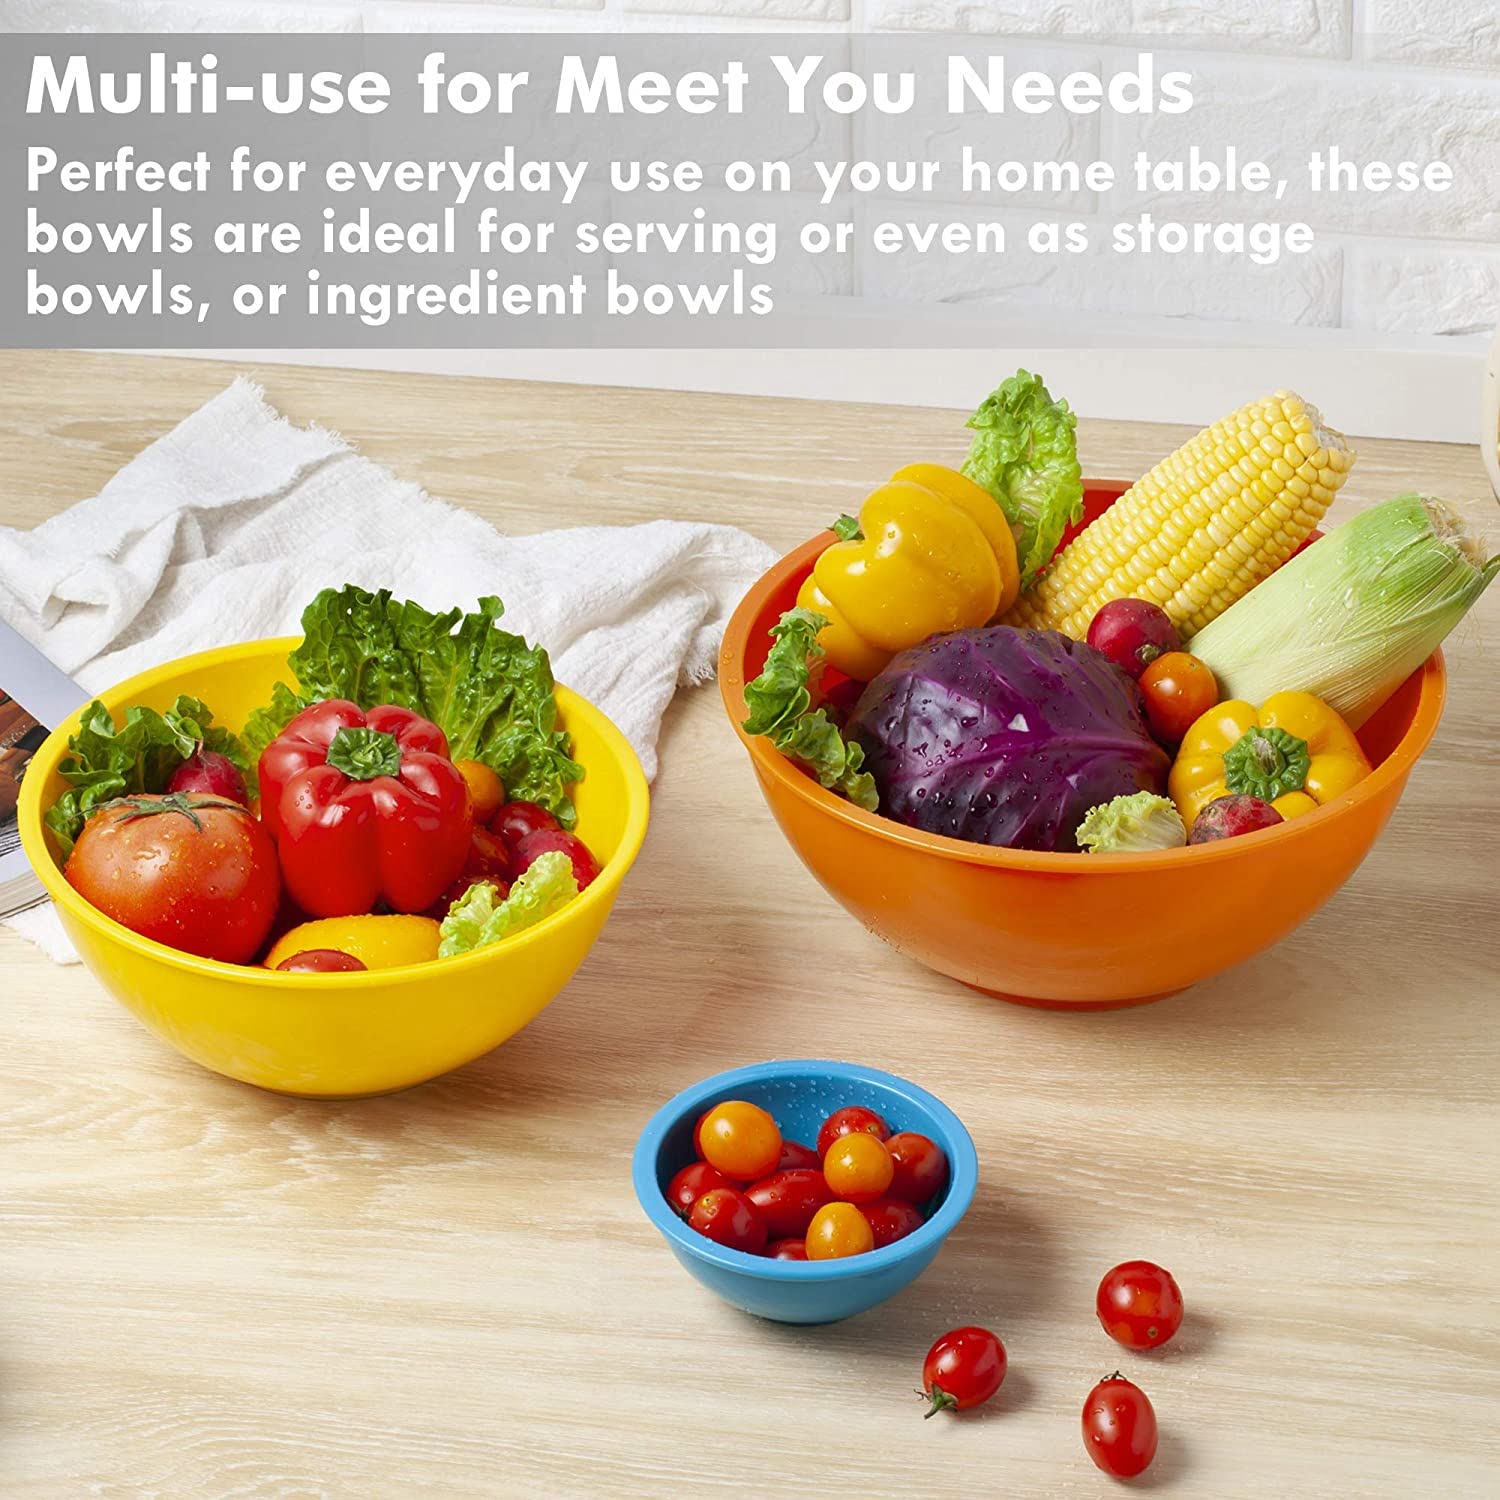 6Pcs Stainless Steel Mixing Bowls Set Nesting Bowls for Space